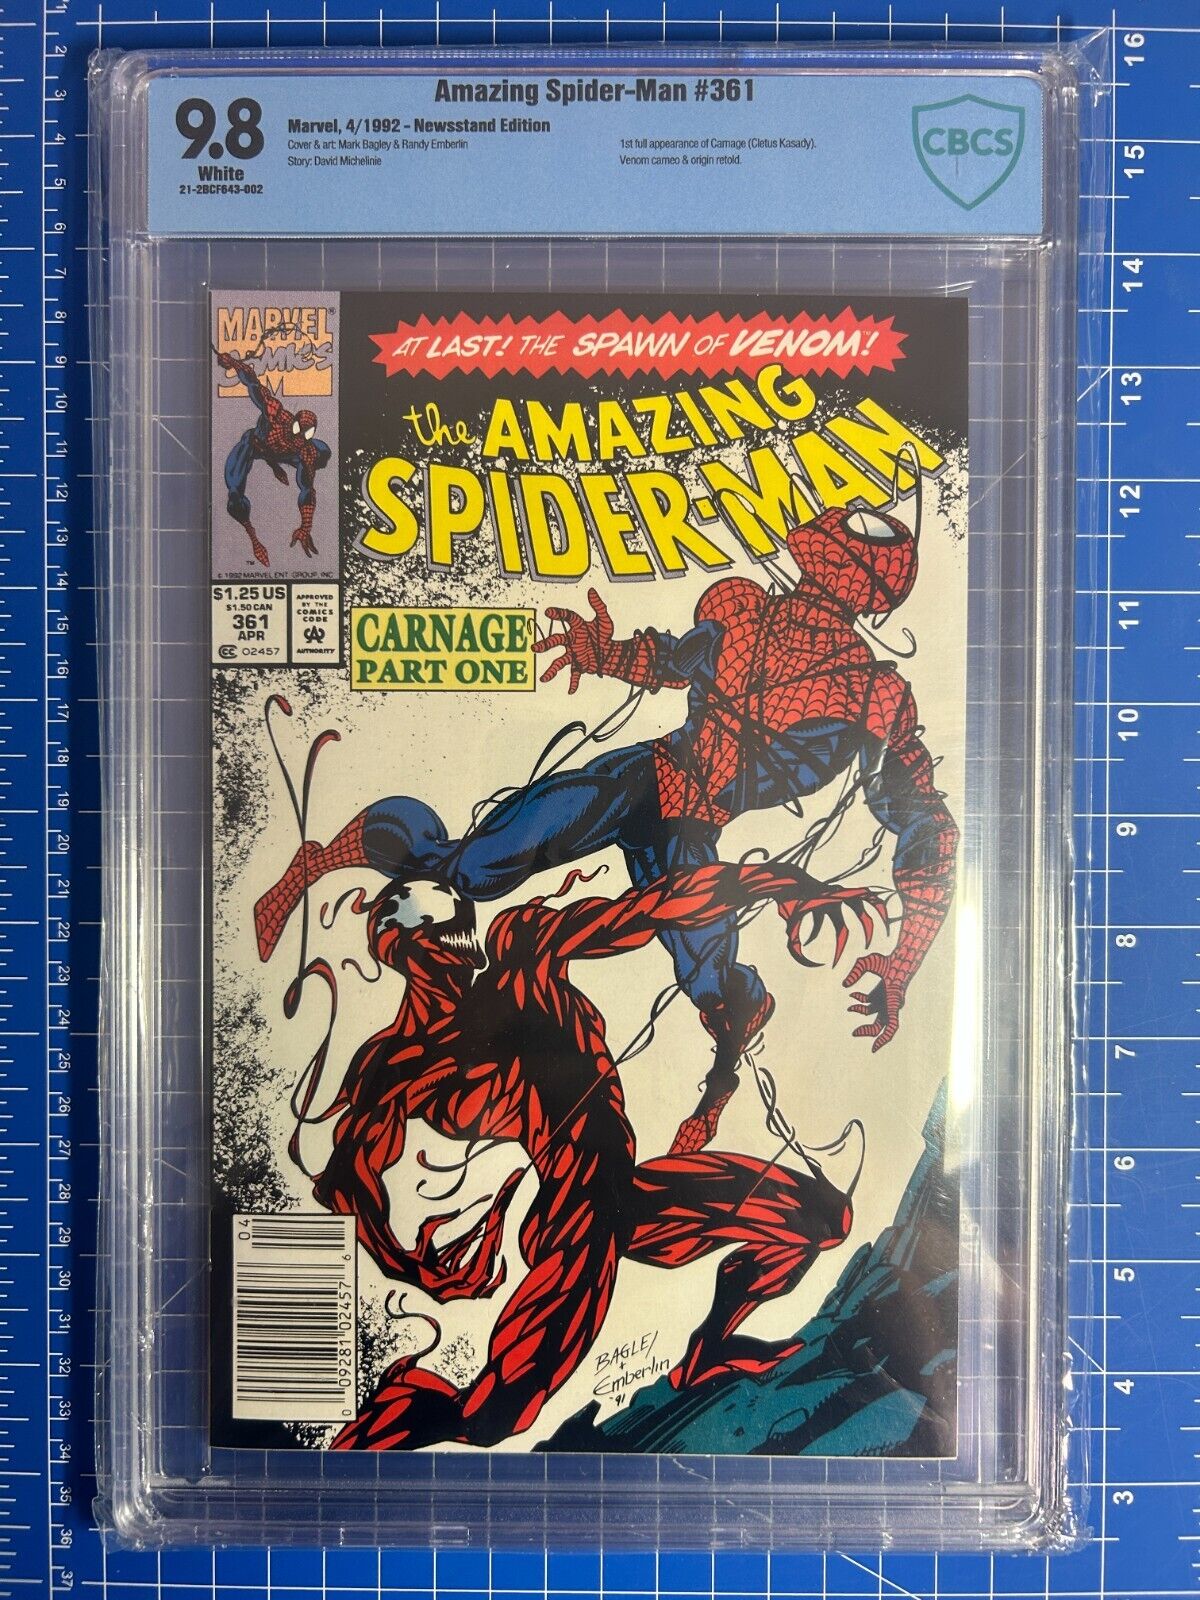 Amazing Spider Man #361 Marvel 1992 CGCS 9.8 NEWSSTAND 1st appearance of Carnage